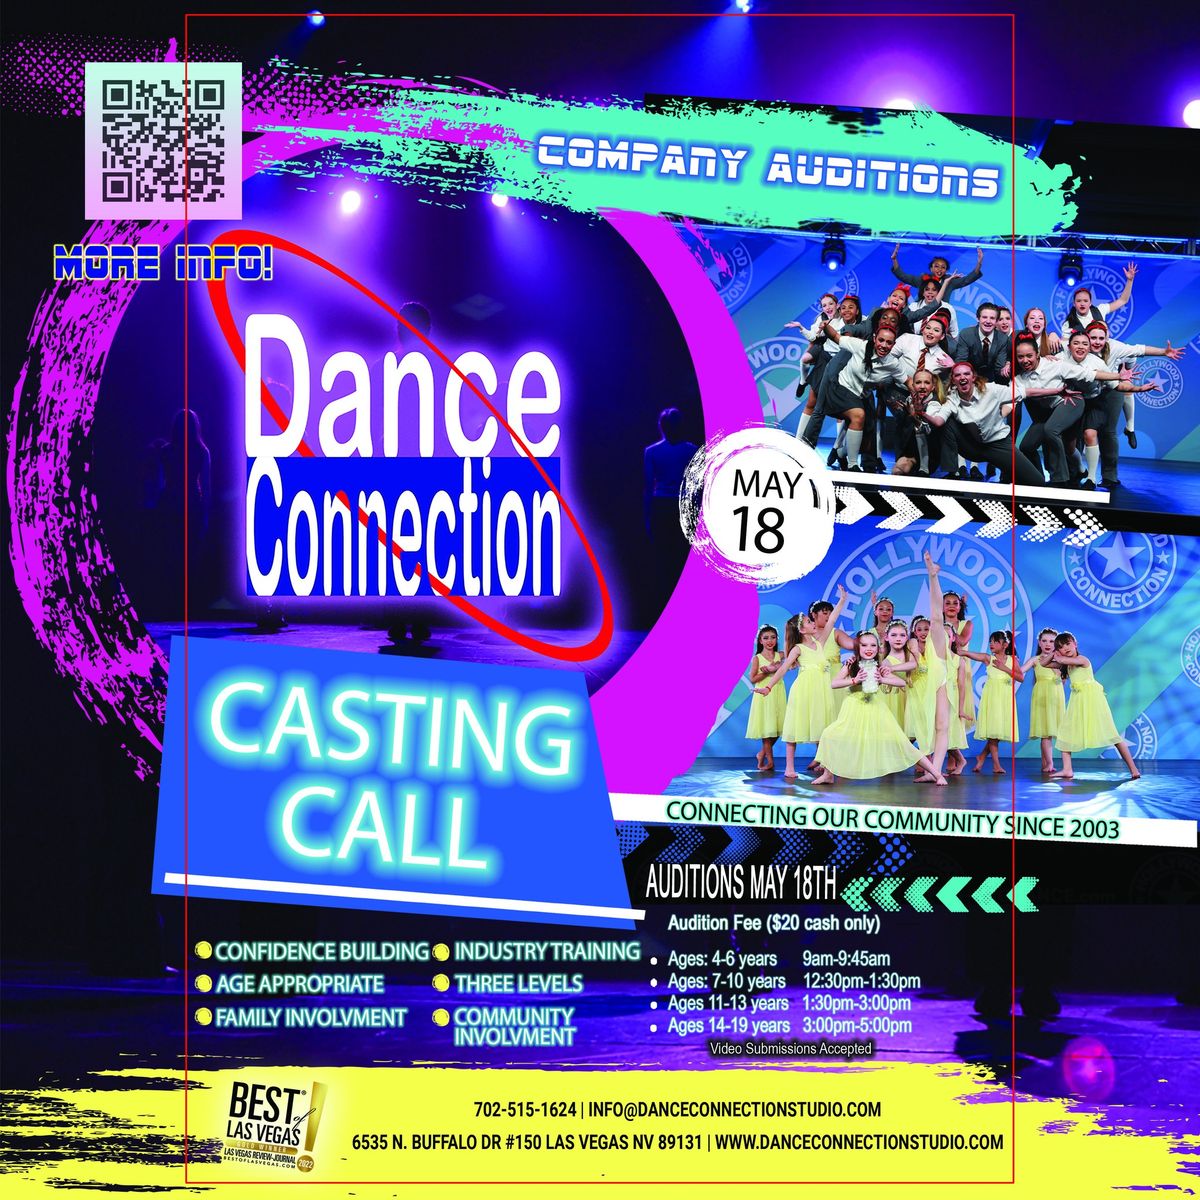 Casting Call: Dance Company Auditions